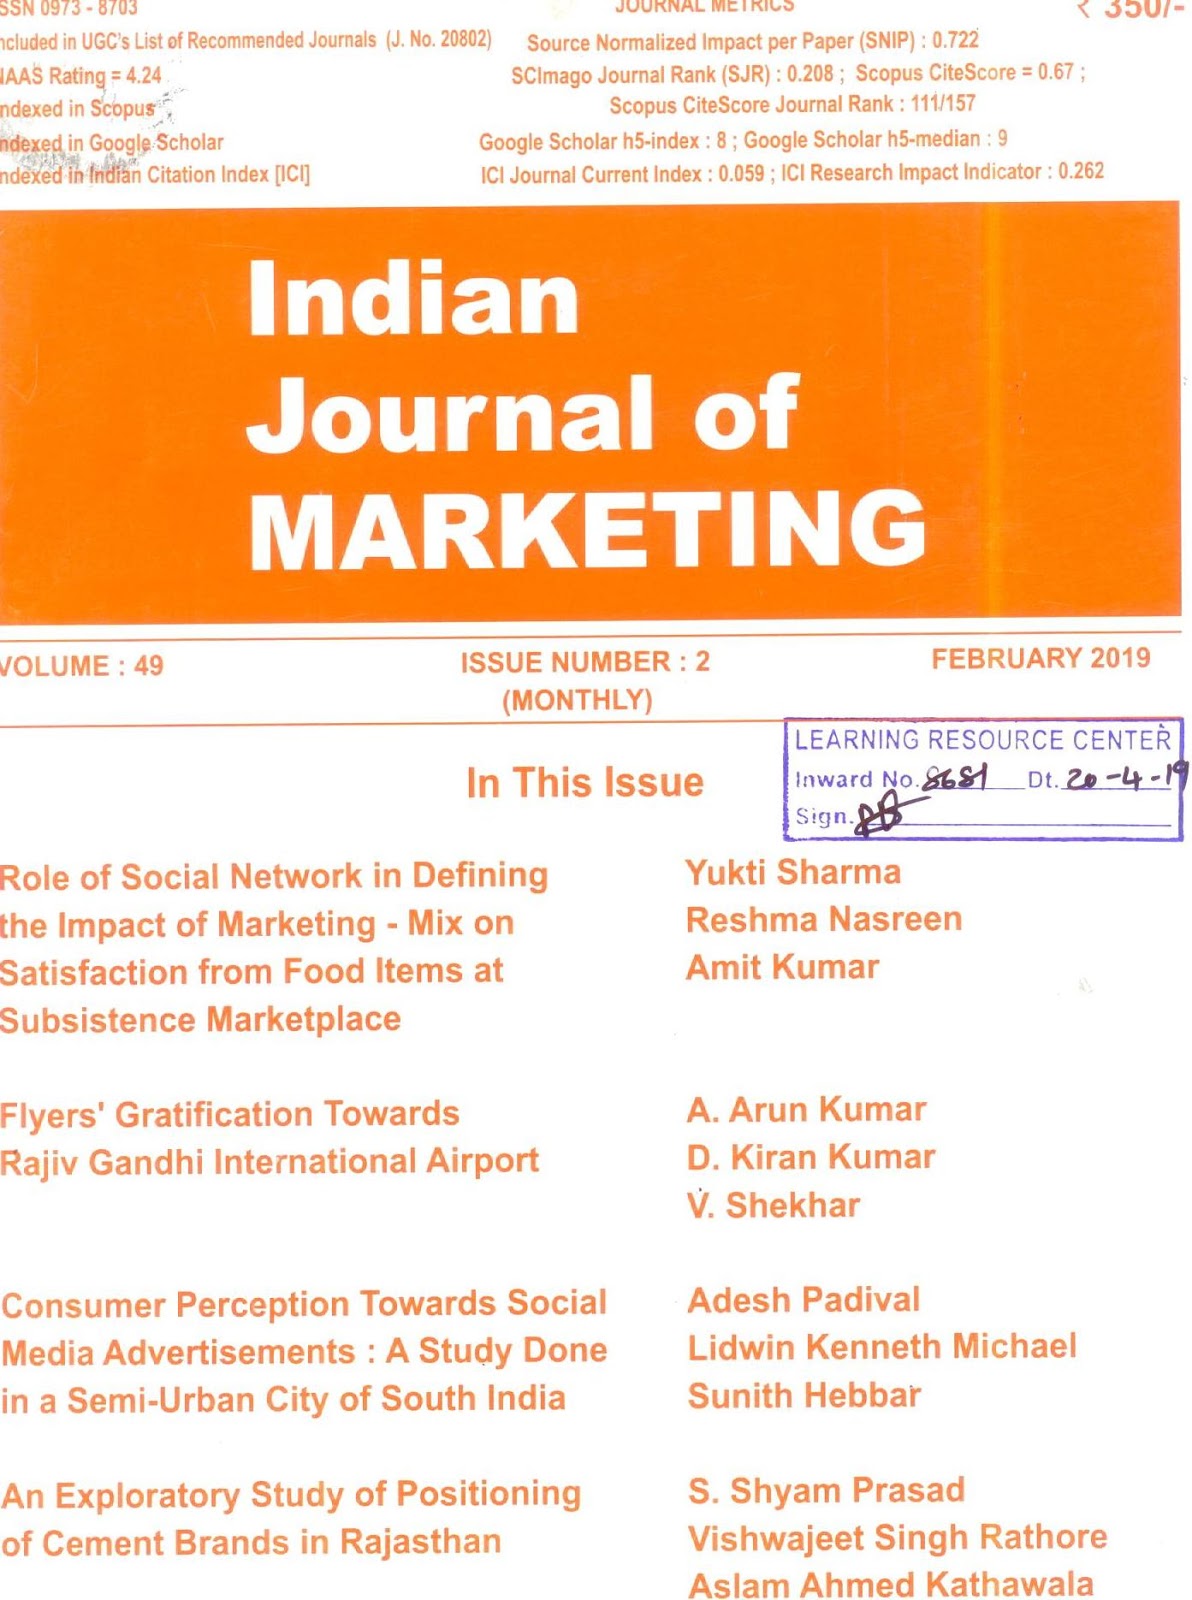 http://indianjournalofmarketing.com/index.php/ijom/issue/view/8375